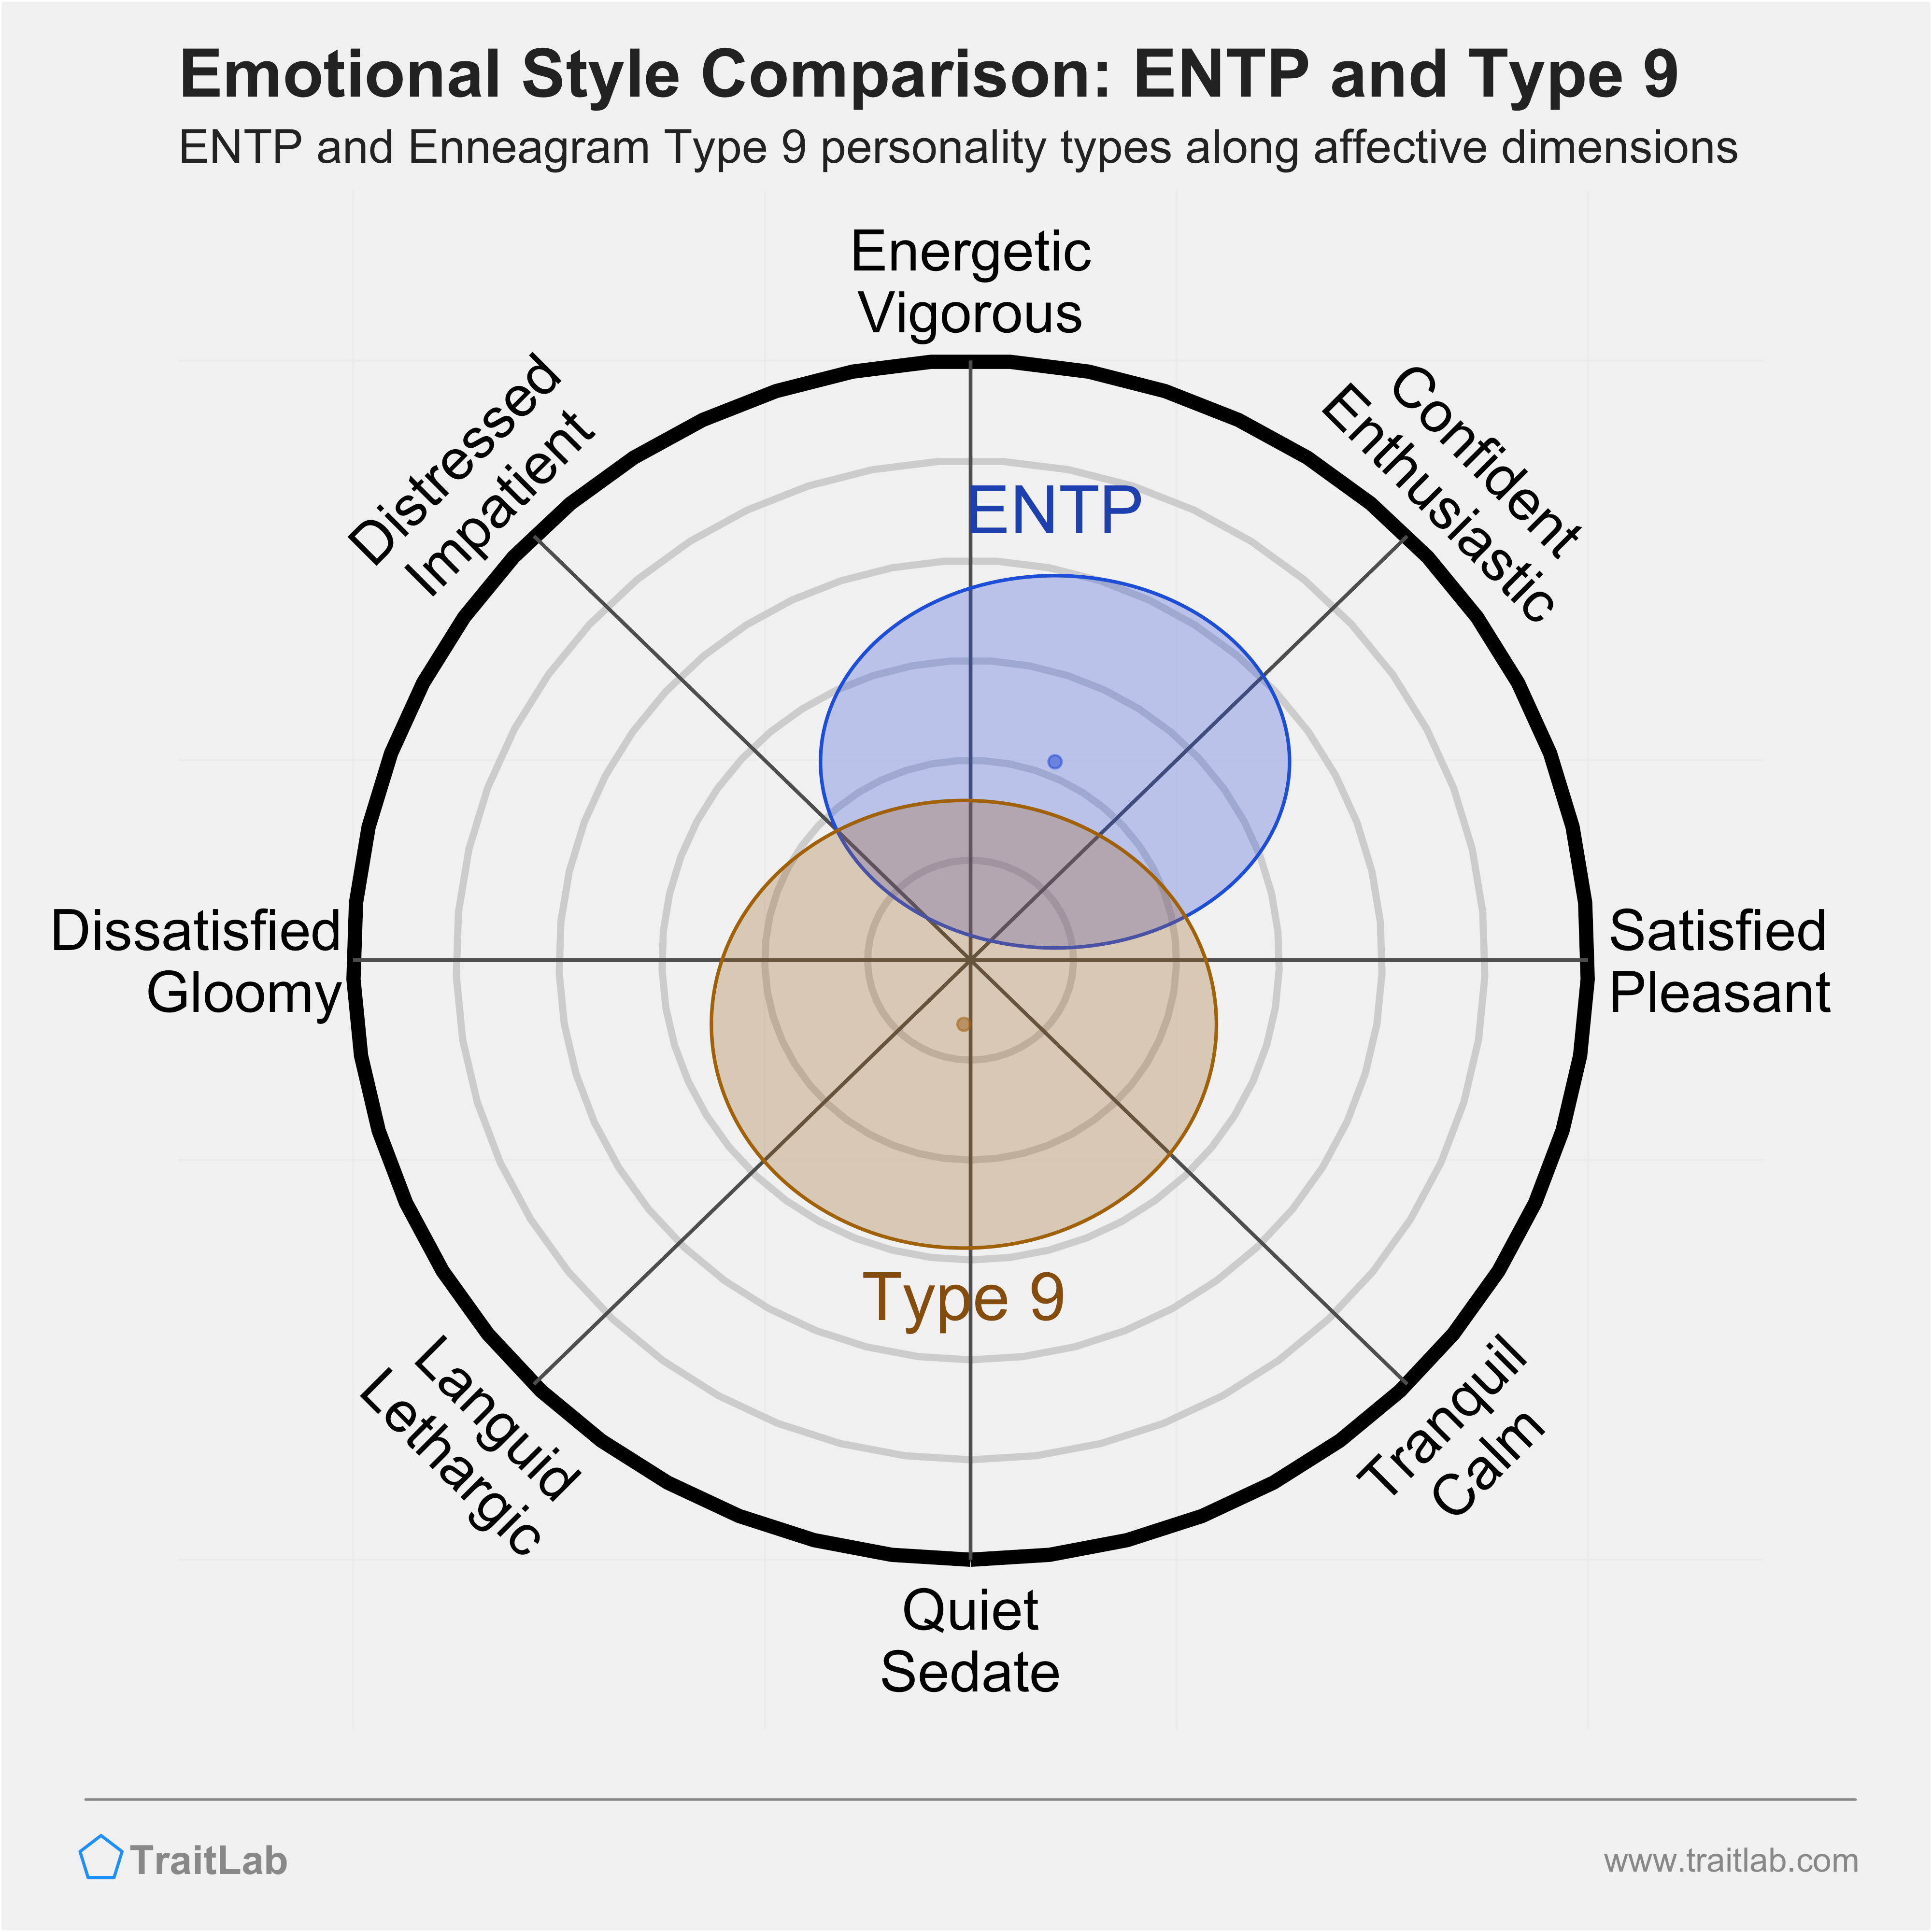 ENTP and Type 9 comparison across emotional (affective) dimensions